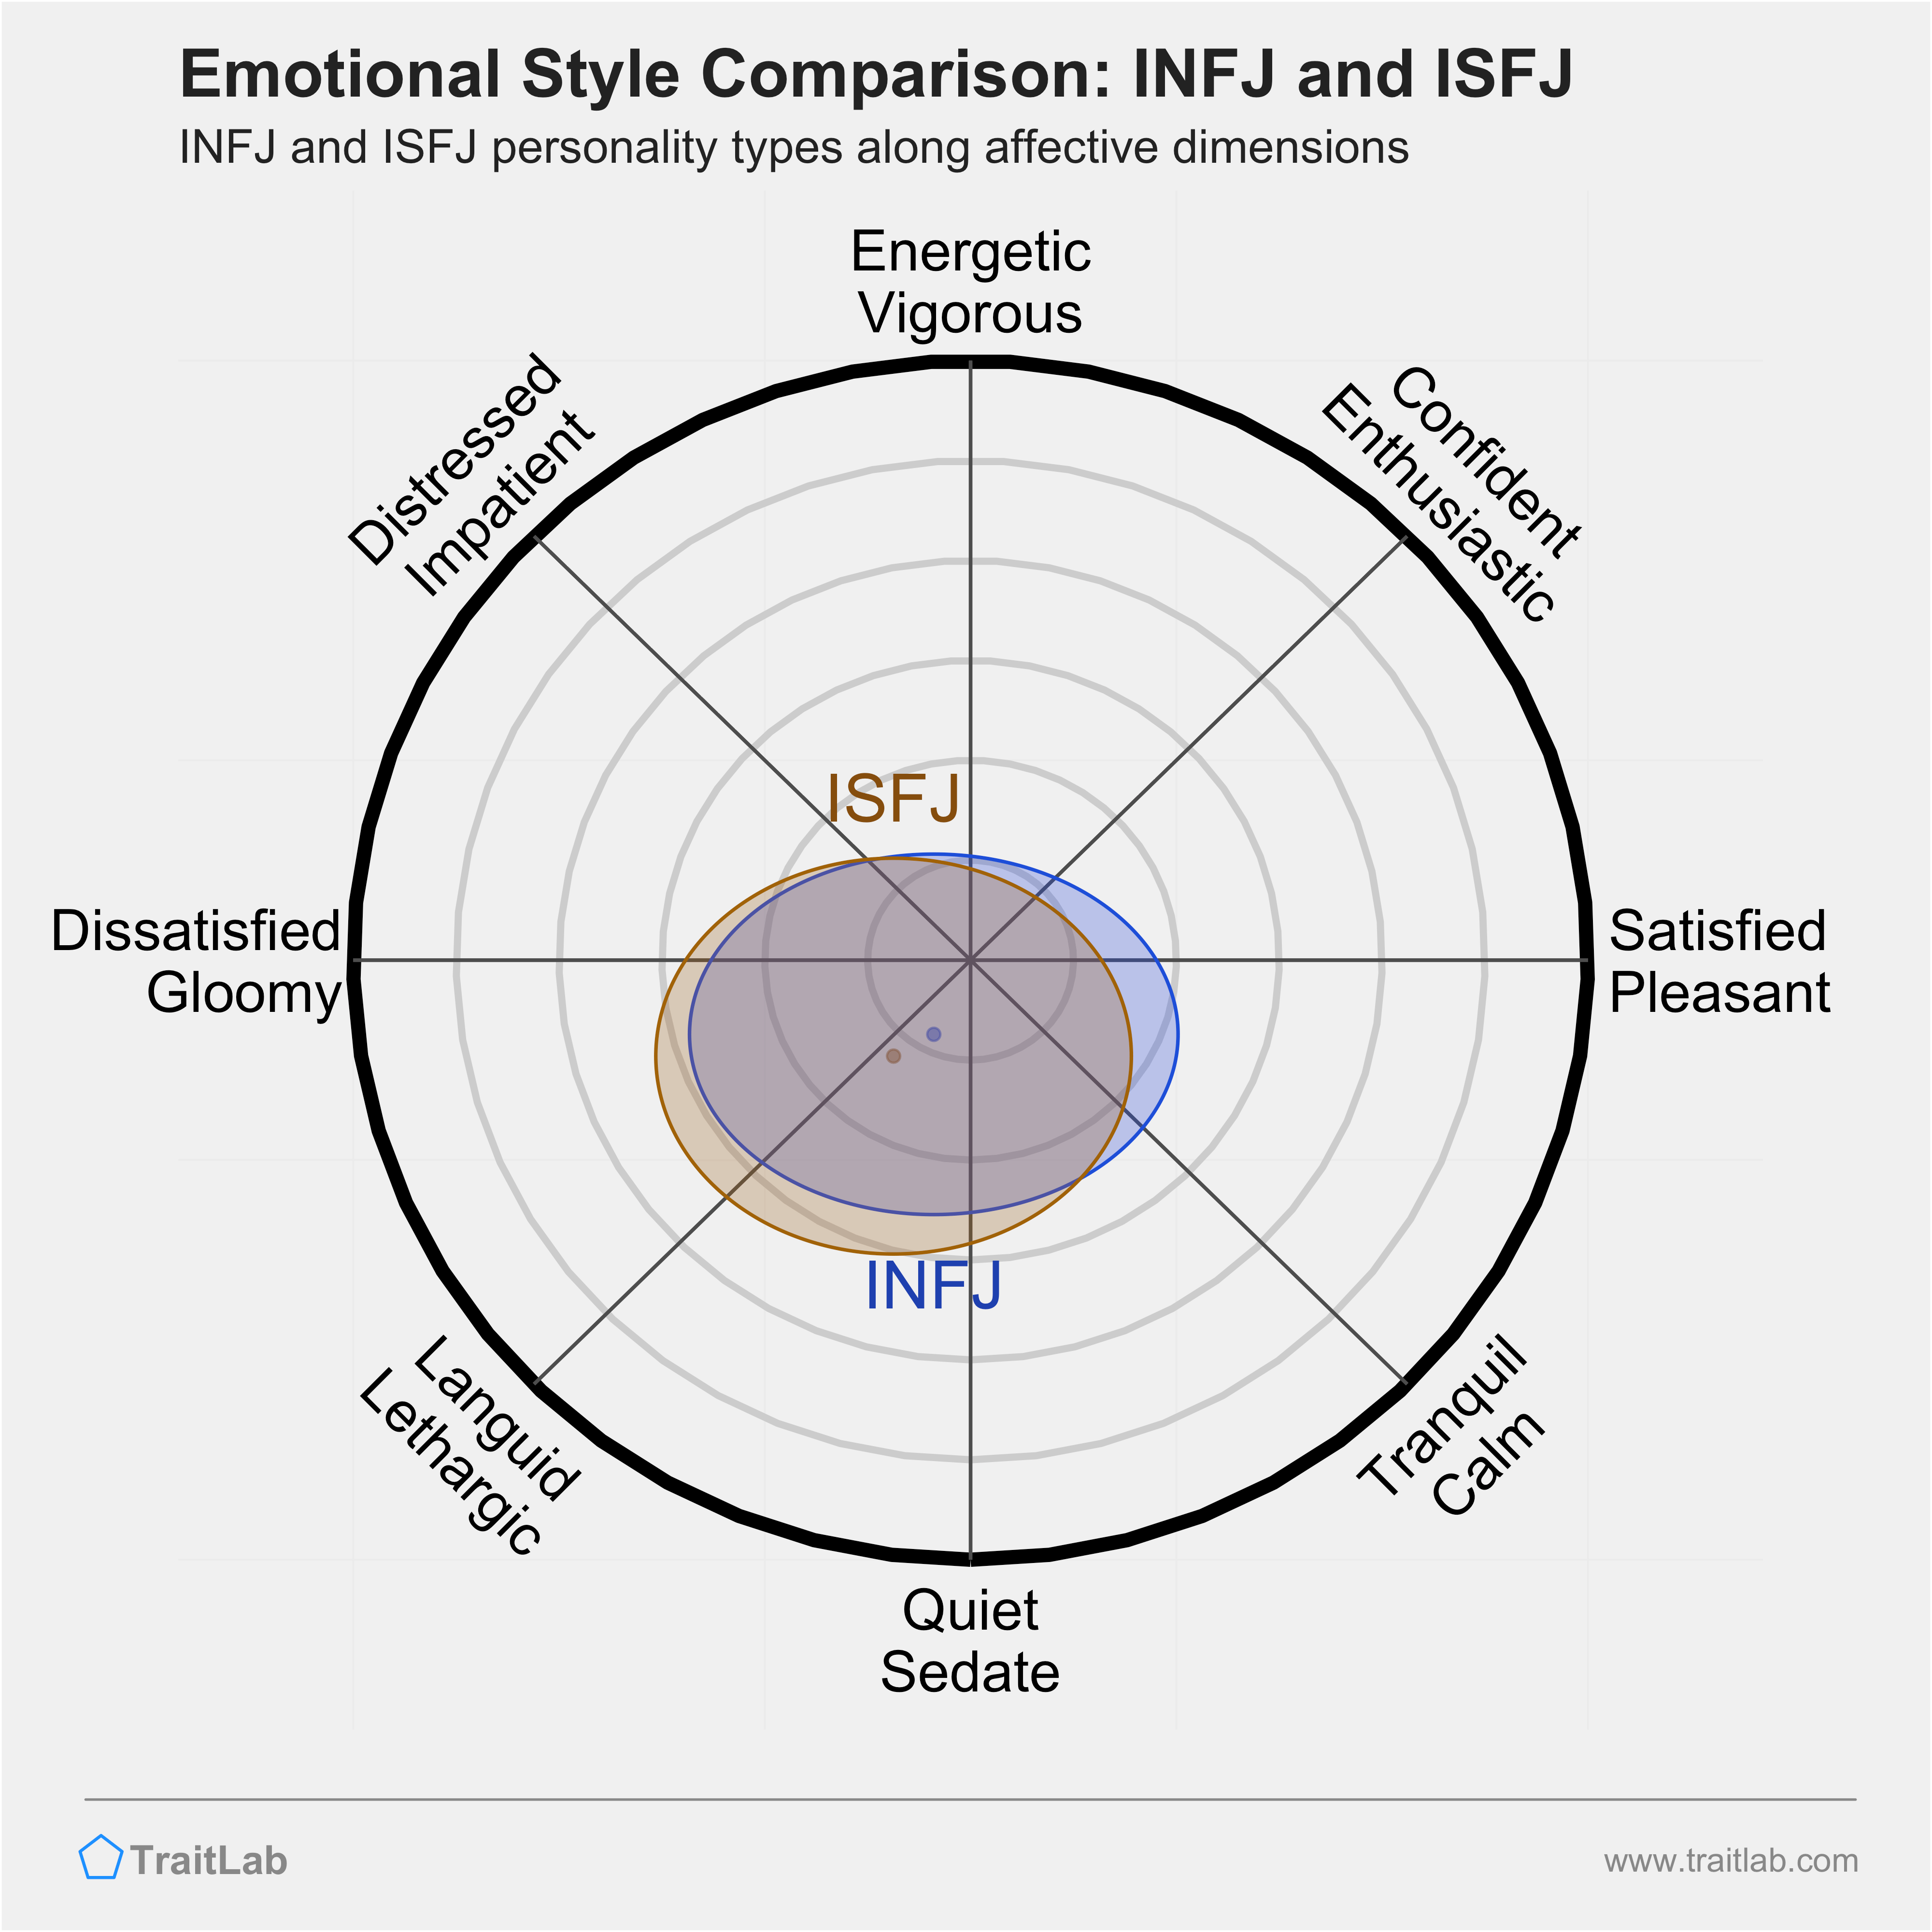 INFJ and ISFJ comparison across emotional (affective) dimensions